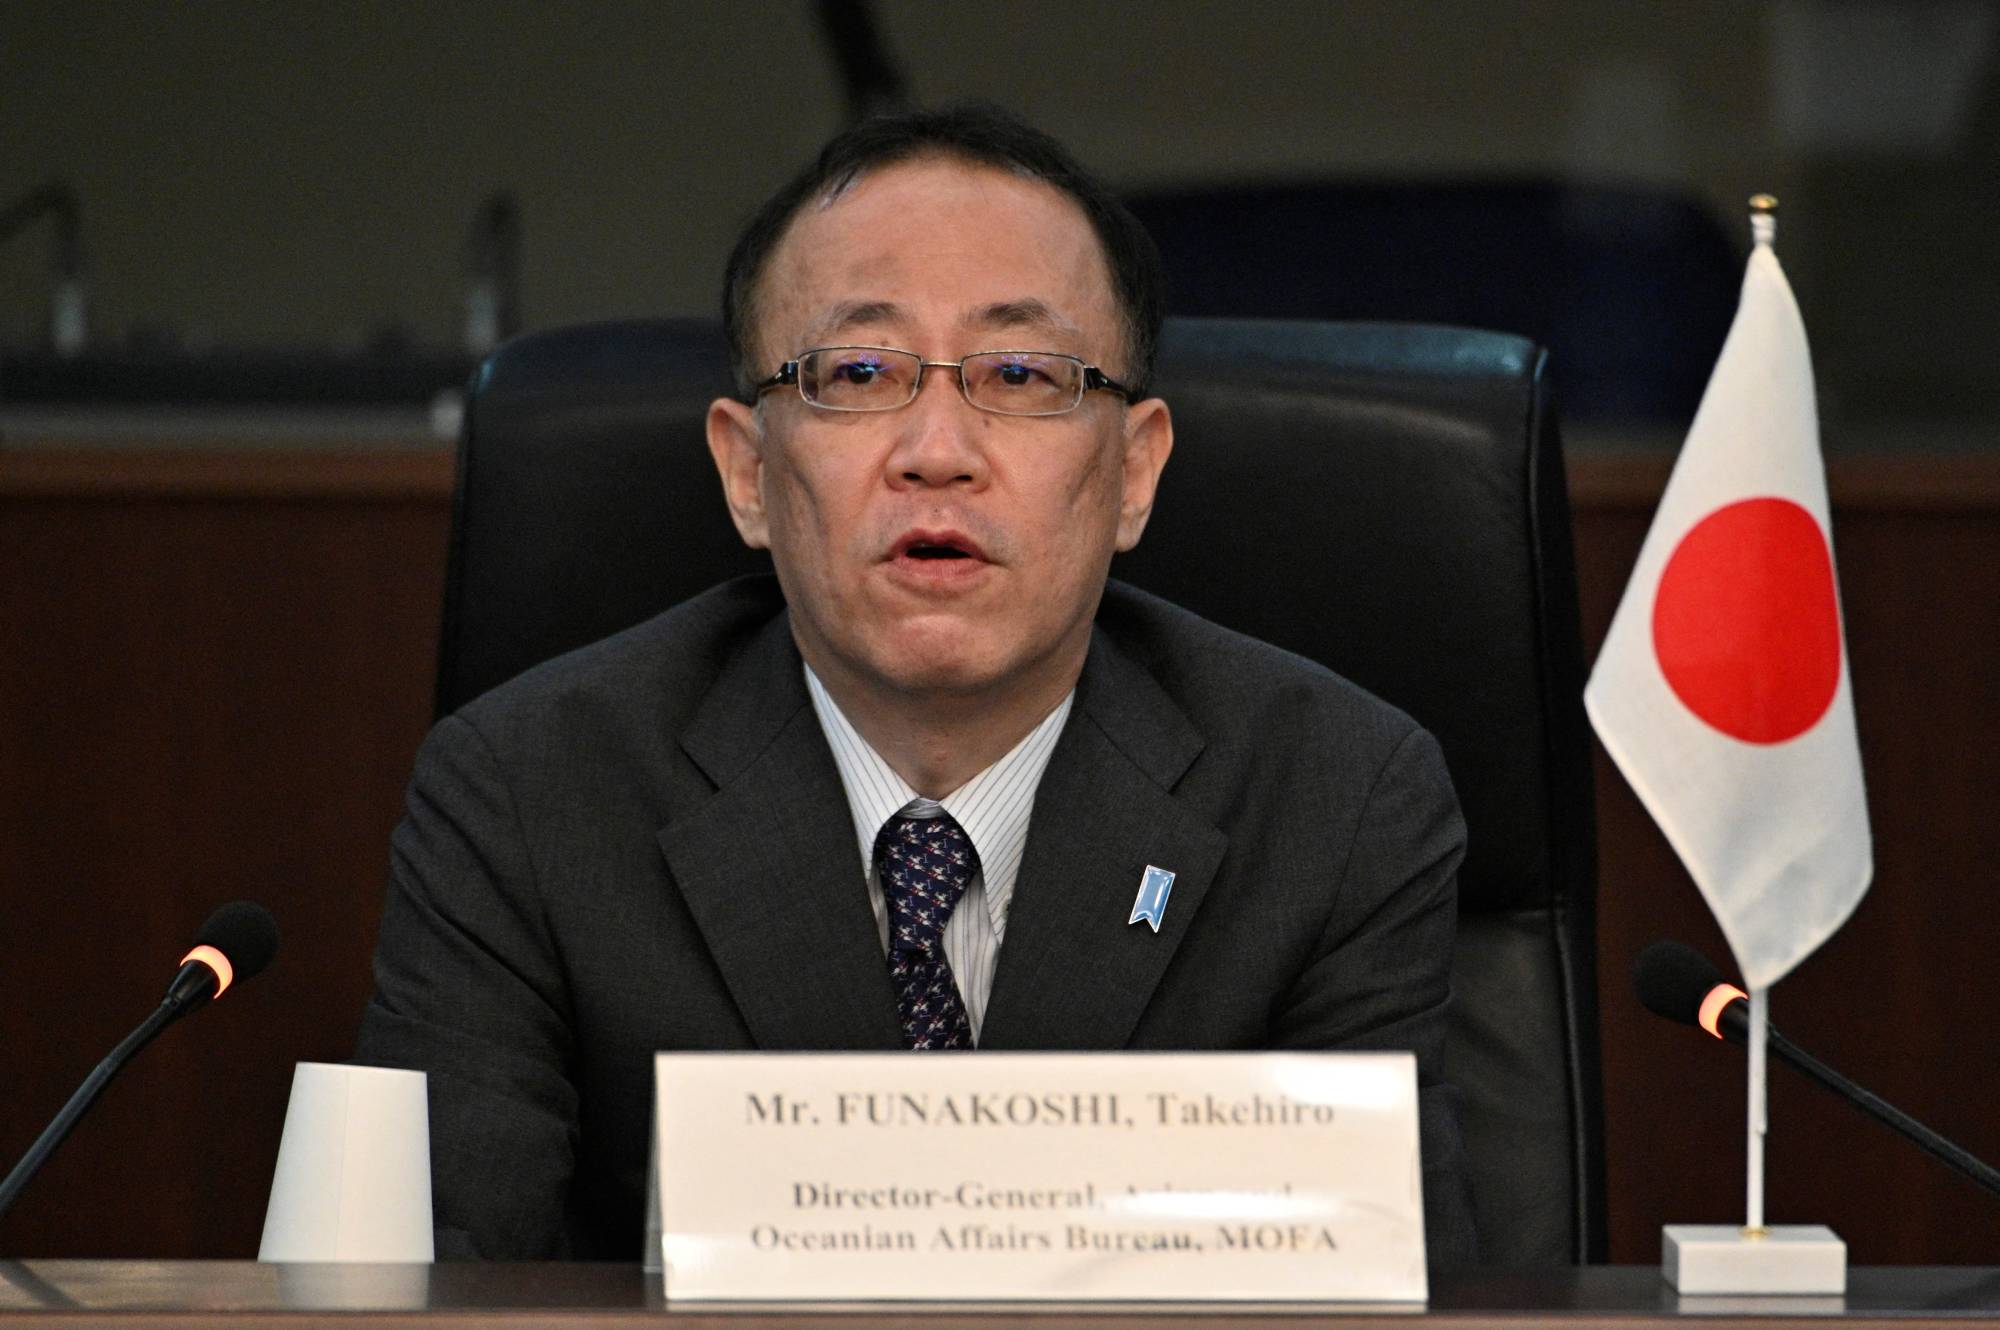 The Foreign Affairs Ministry's director-general for Asian and Oceanian affairs, Takehiro Funakoshi, speaks during a Japan-U.S.-South Korea trilateral meeting in Tokyo in September. | POOL / VIA REUTERS